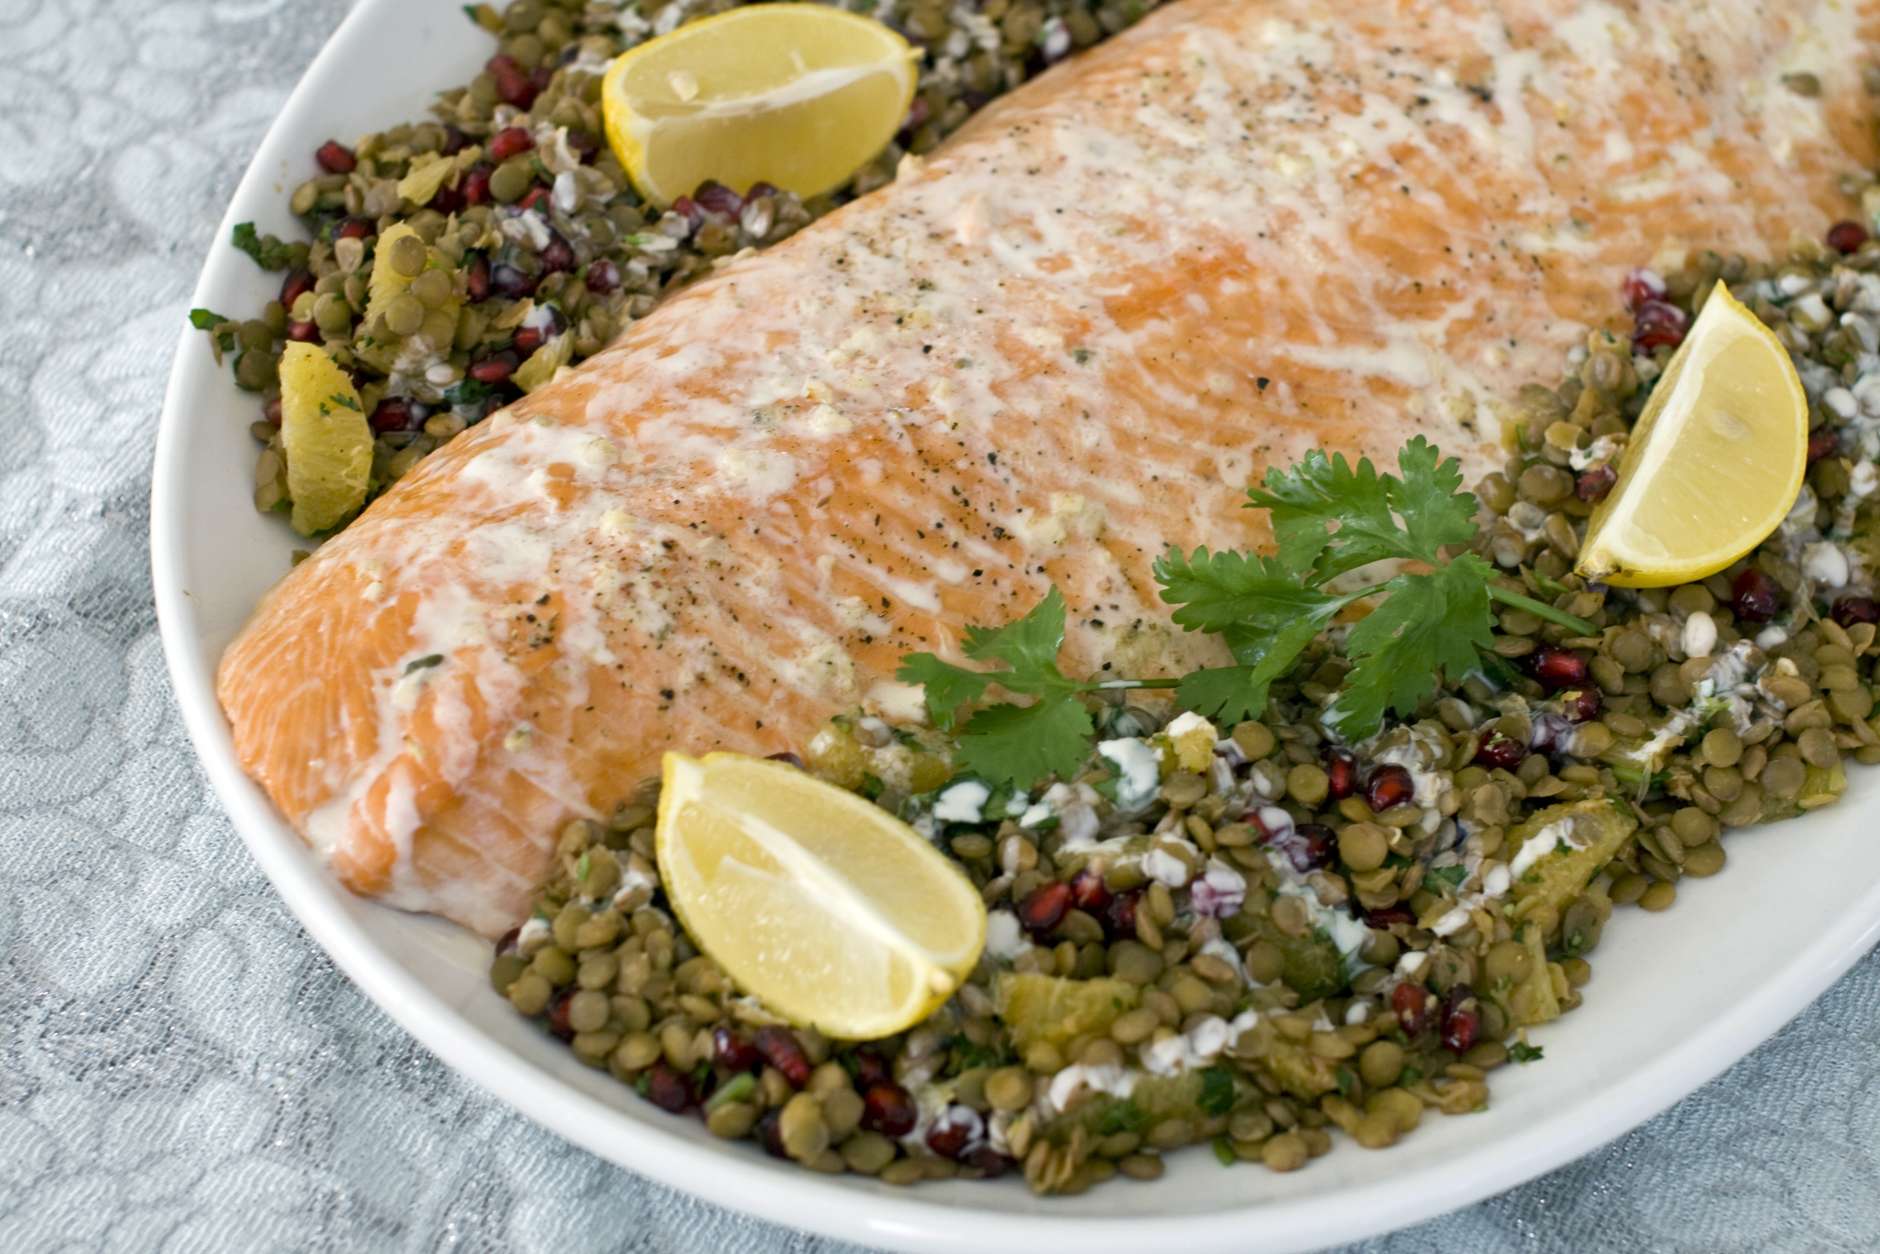 This Nov. 21, 2011 photo shows roasted salmon with warm lentil salad in Concord, N.H.   Feeding a crowd this New Years Eve? Consider offering something that is richly savory, but wont weigh down the party.    (AP Photo/Matthew Mead)